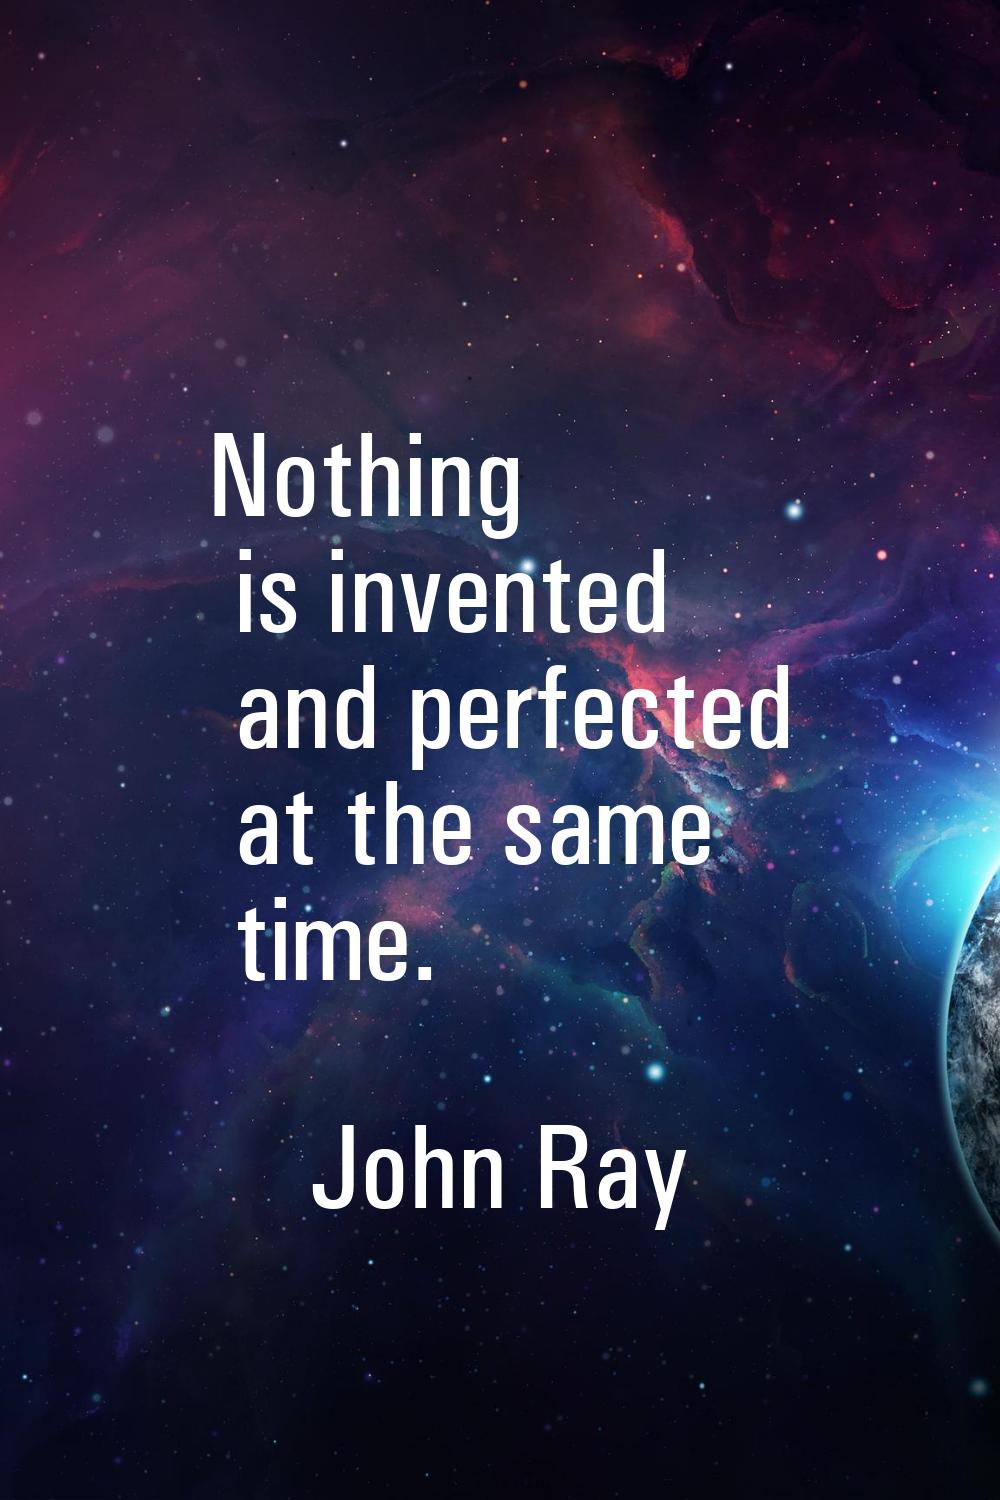 Nothing is invented and perfected at the same time.